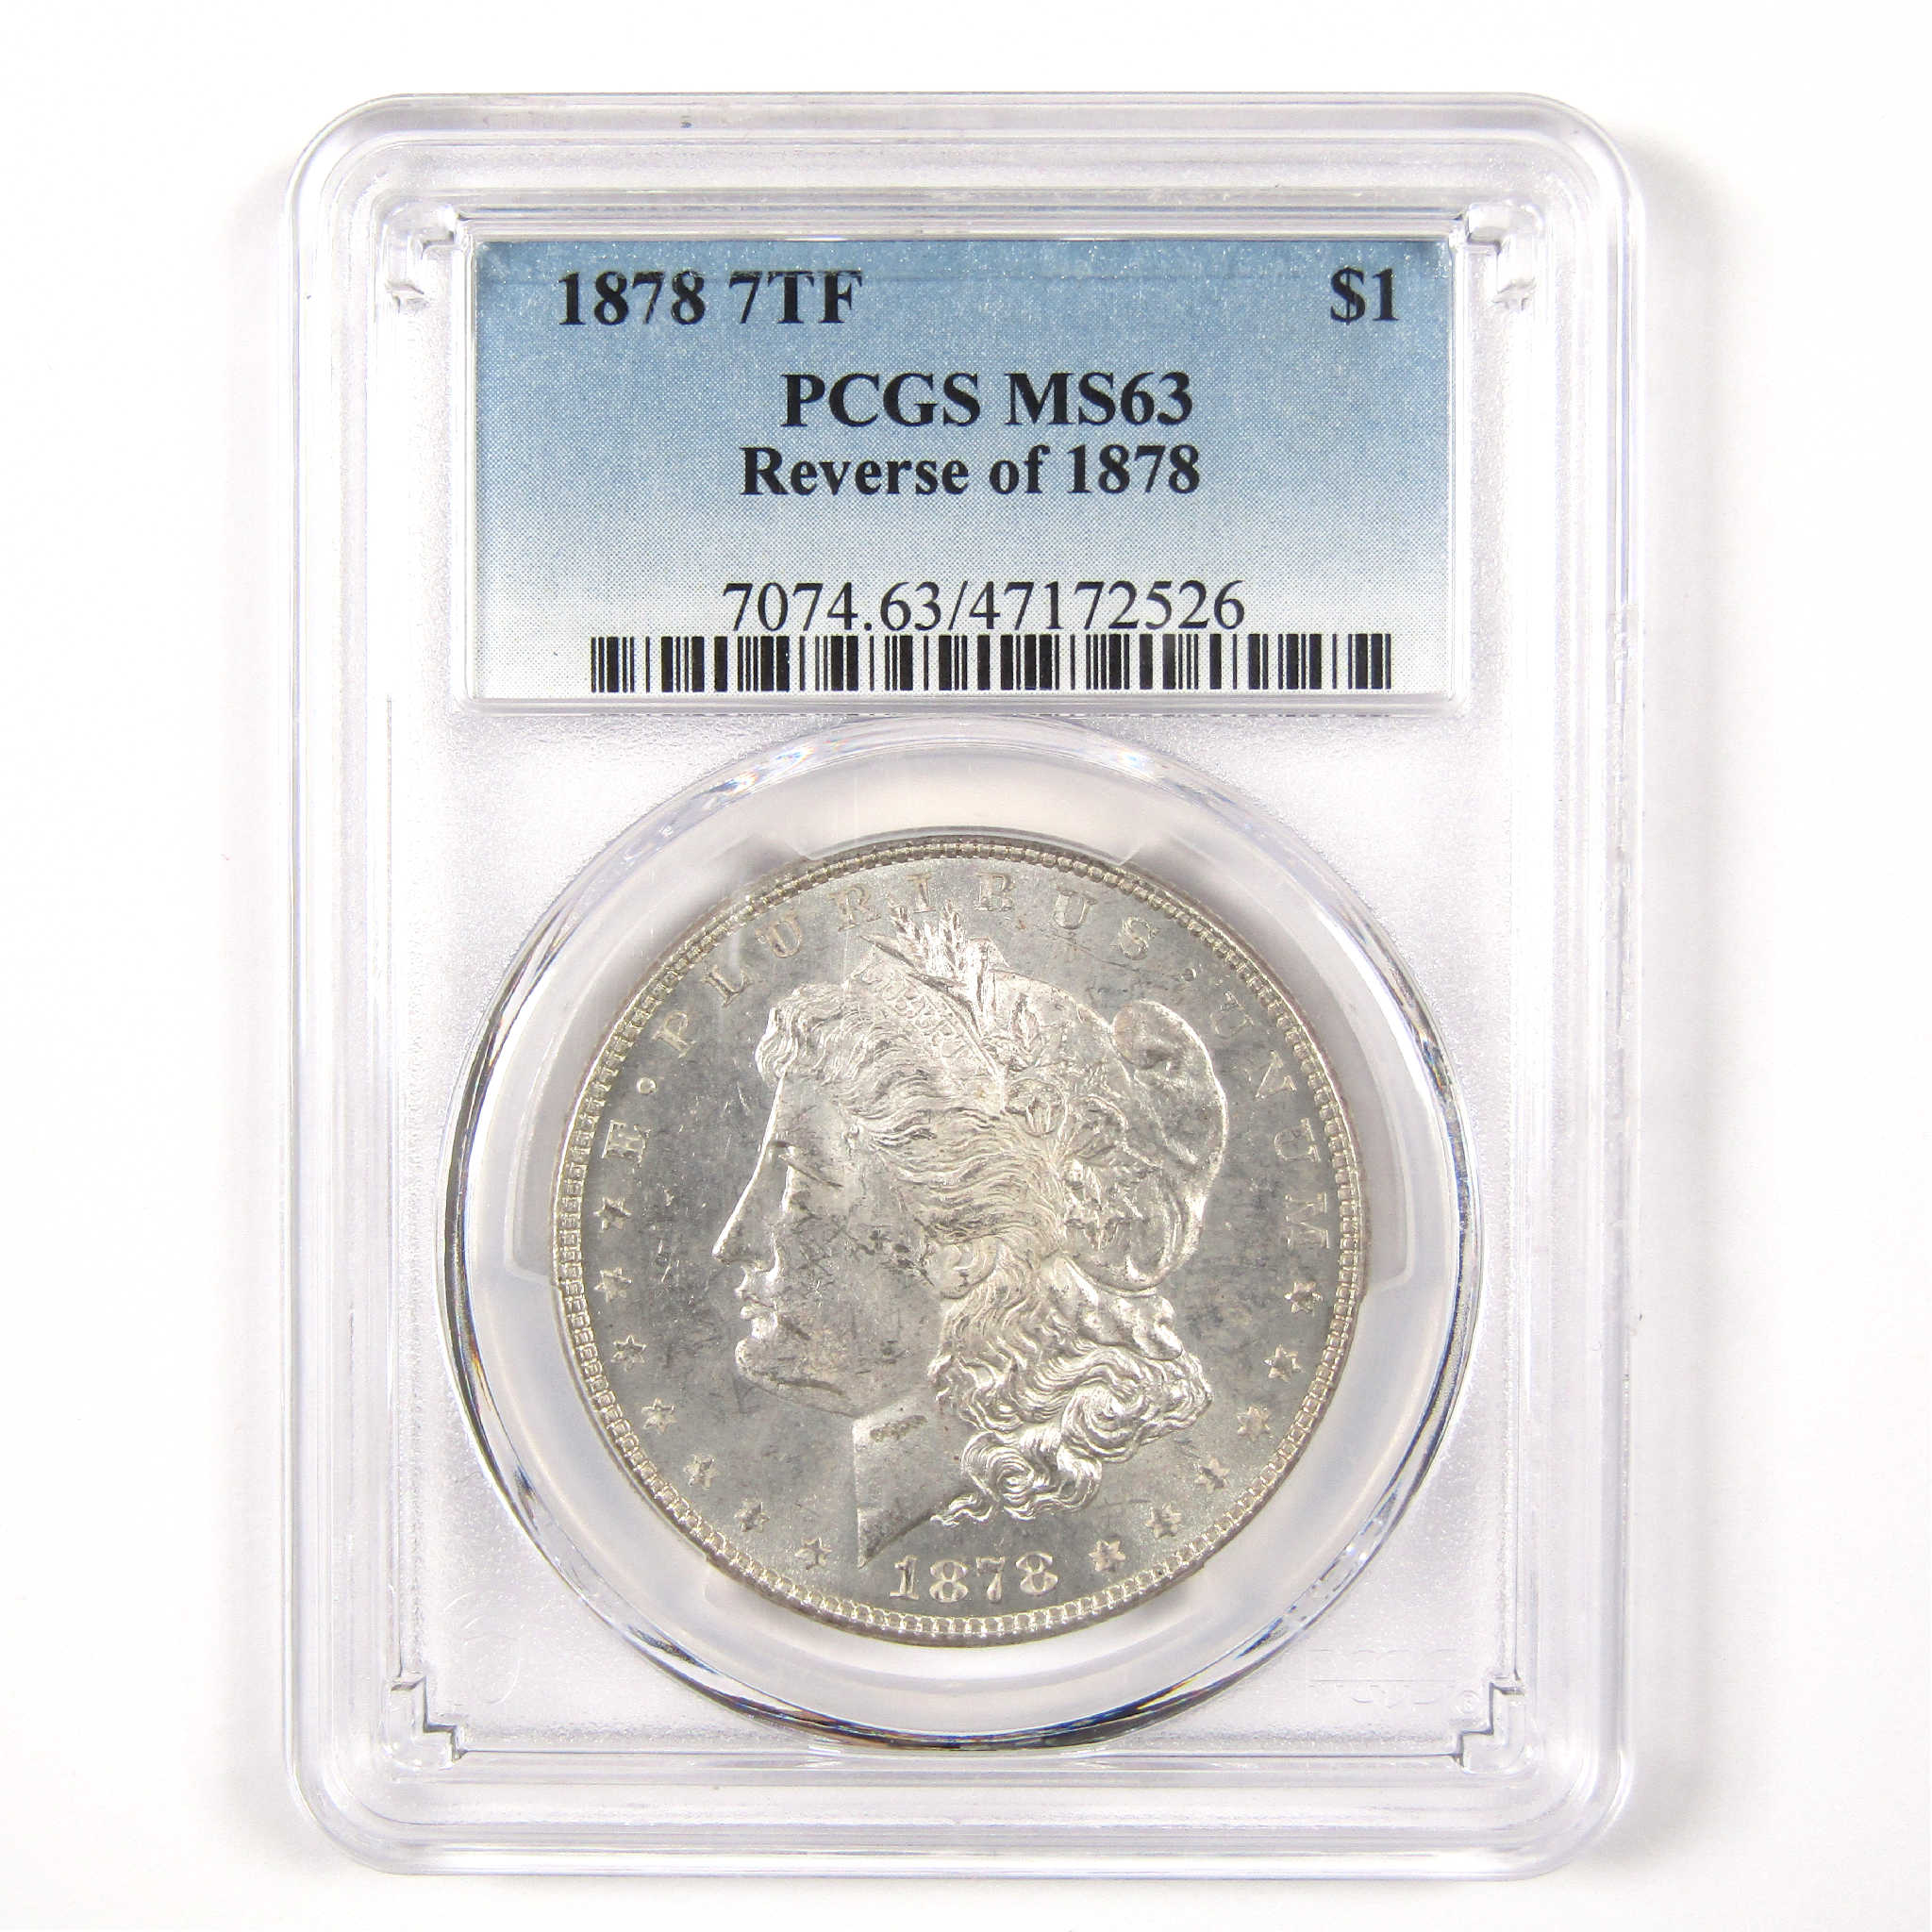 1878 7TF Rev 78 Morgan Dollar MS 63 PCGS Silver $1 Unc SKU:I11305 - Morgan coin - Morgan silver dollar - Morgan silver dollar for sale - Profile Coins &amp; Collectibles